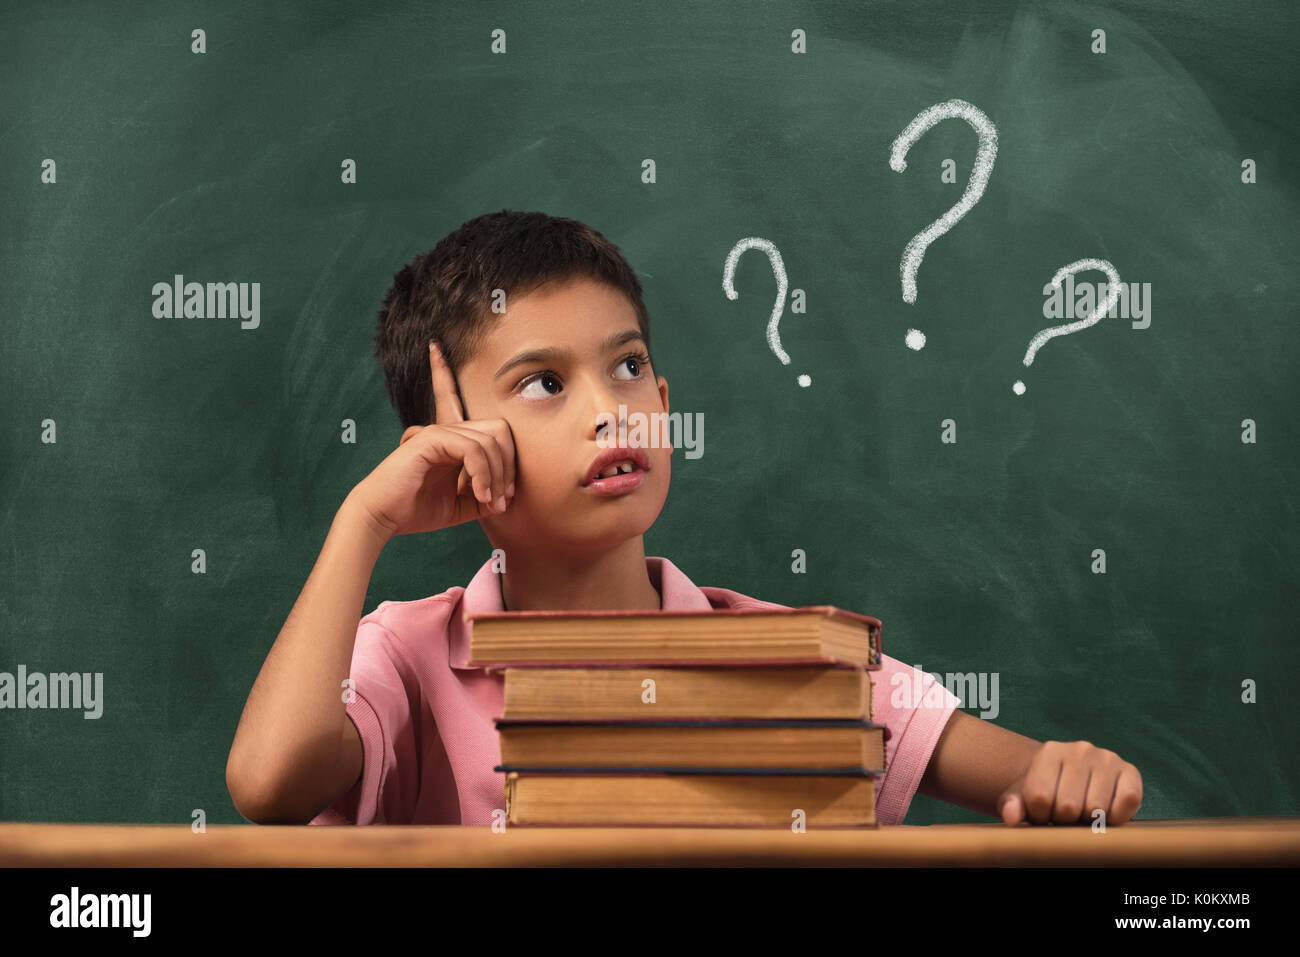 Boy with doubts and thoughts in class. Portrait of male child thinking against question marks on blackboard Stock Photo